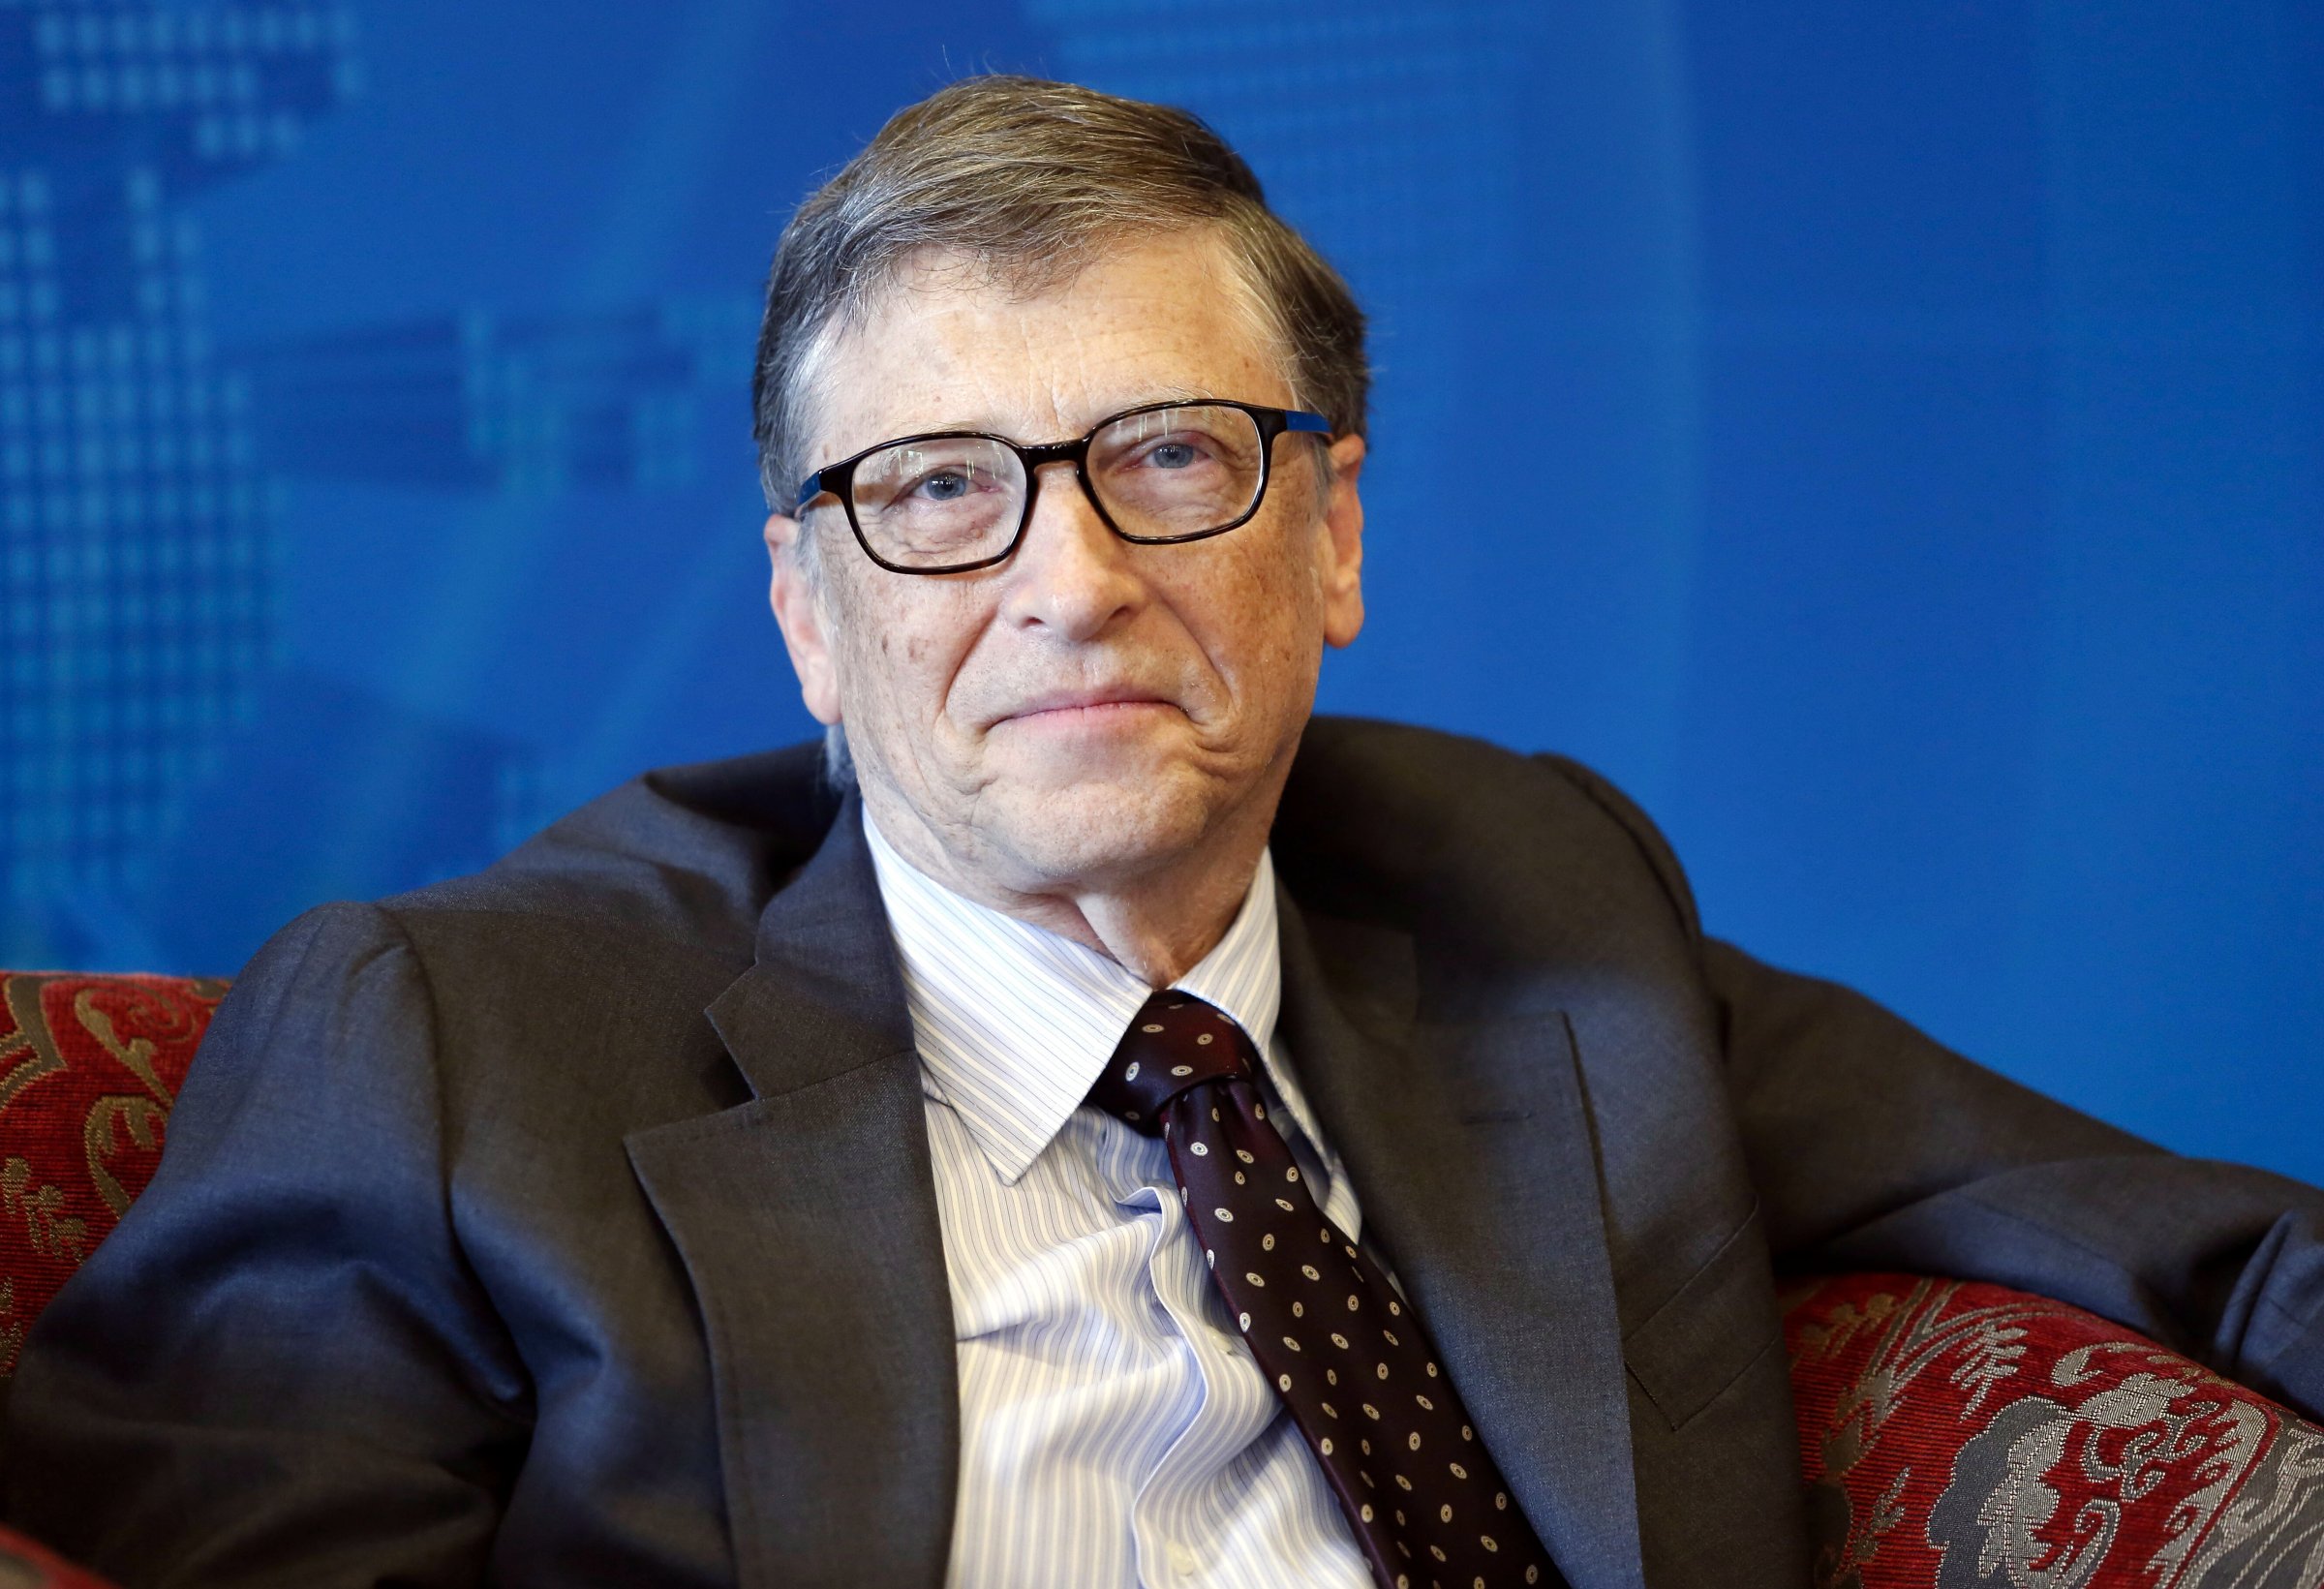 Bill Gates, co-founder of Microsoft attends a breakfast meeting with the theme "Dialogue: Technology & Innovation for a Sustainable Future" during the Boao Forum For Asia Annual Conference 2015 in Qionghai city, Hainan Province, China on March 29, 2015.